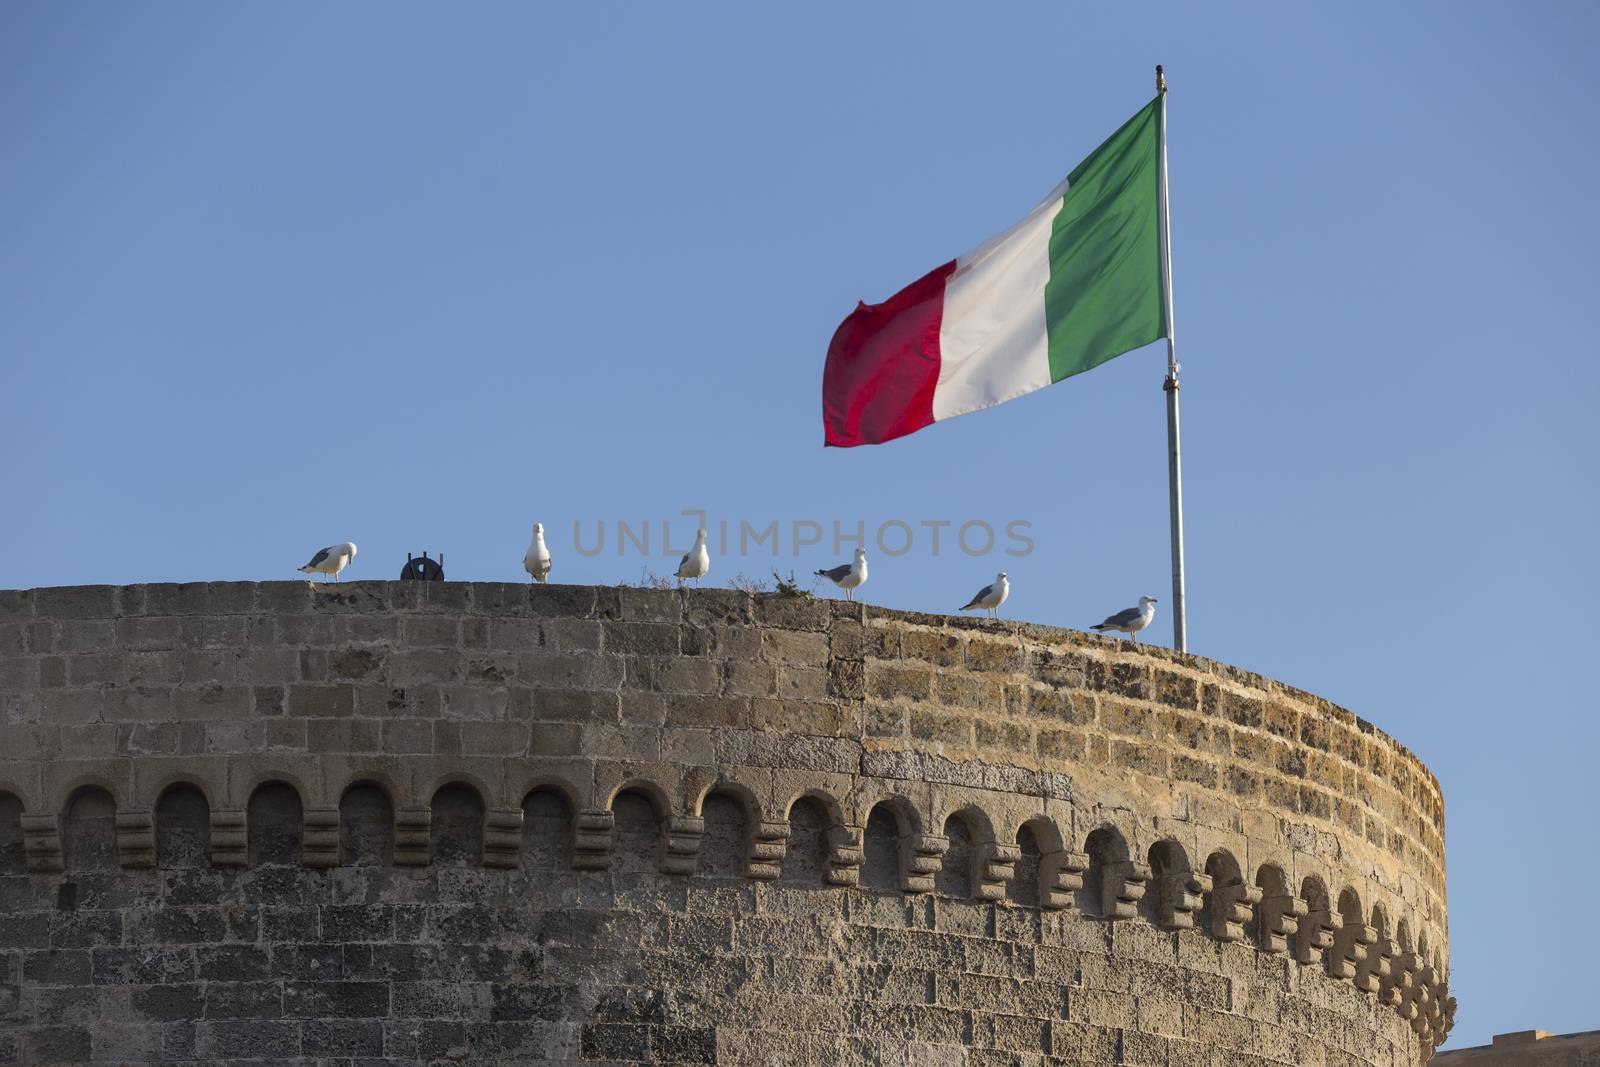 Seagulls (Larinae Rafinesque) standing near Italian flag blowing in the wind: red; white and green on ancient tower in Gallipoli (Le) in the Southern Italy